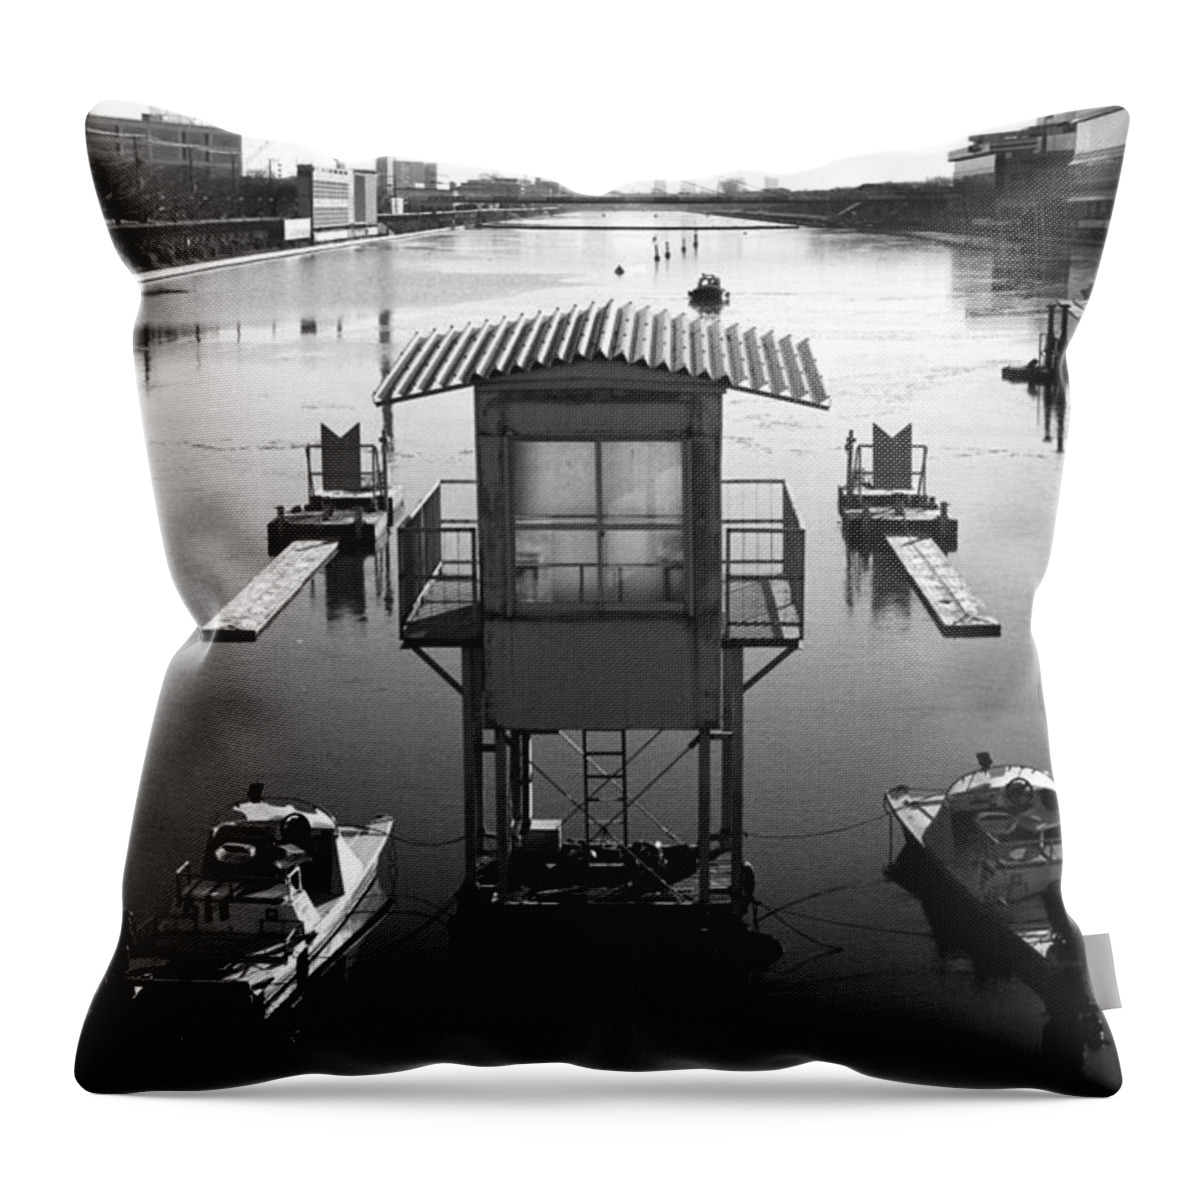 Standing Water Throw Pillow featuring the photograph Frozen Boat Course by Huzu1959